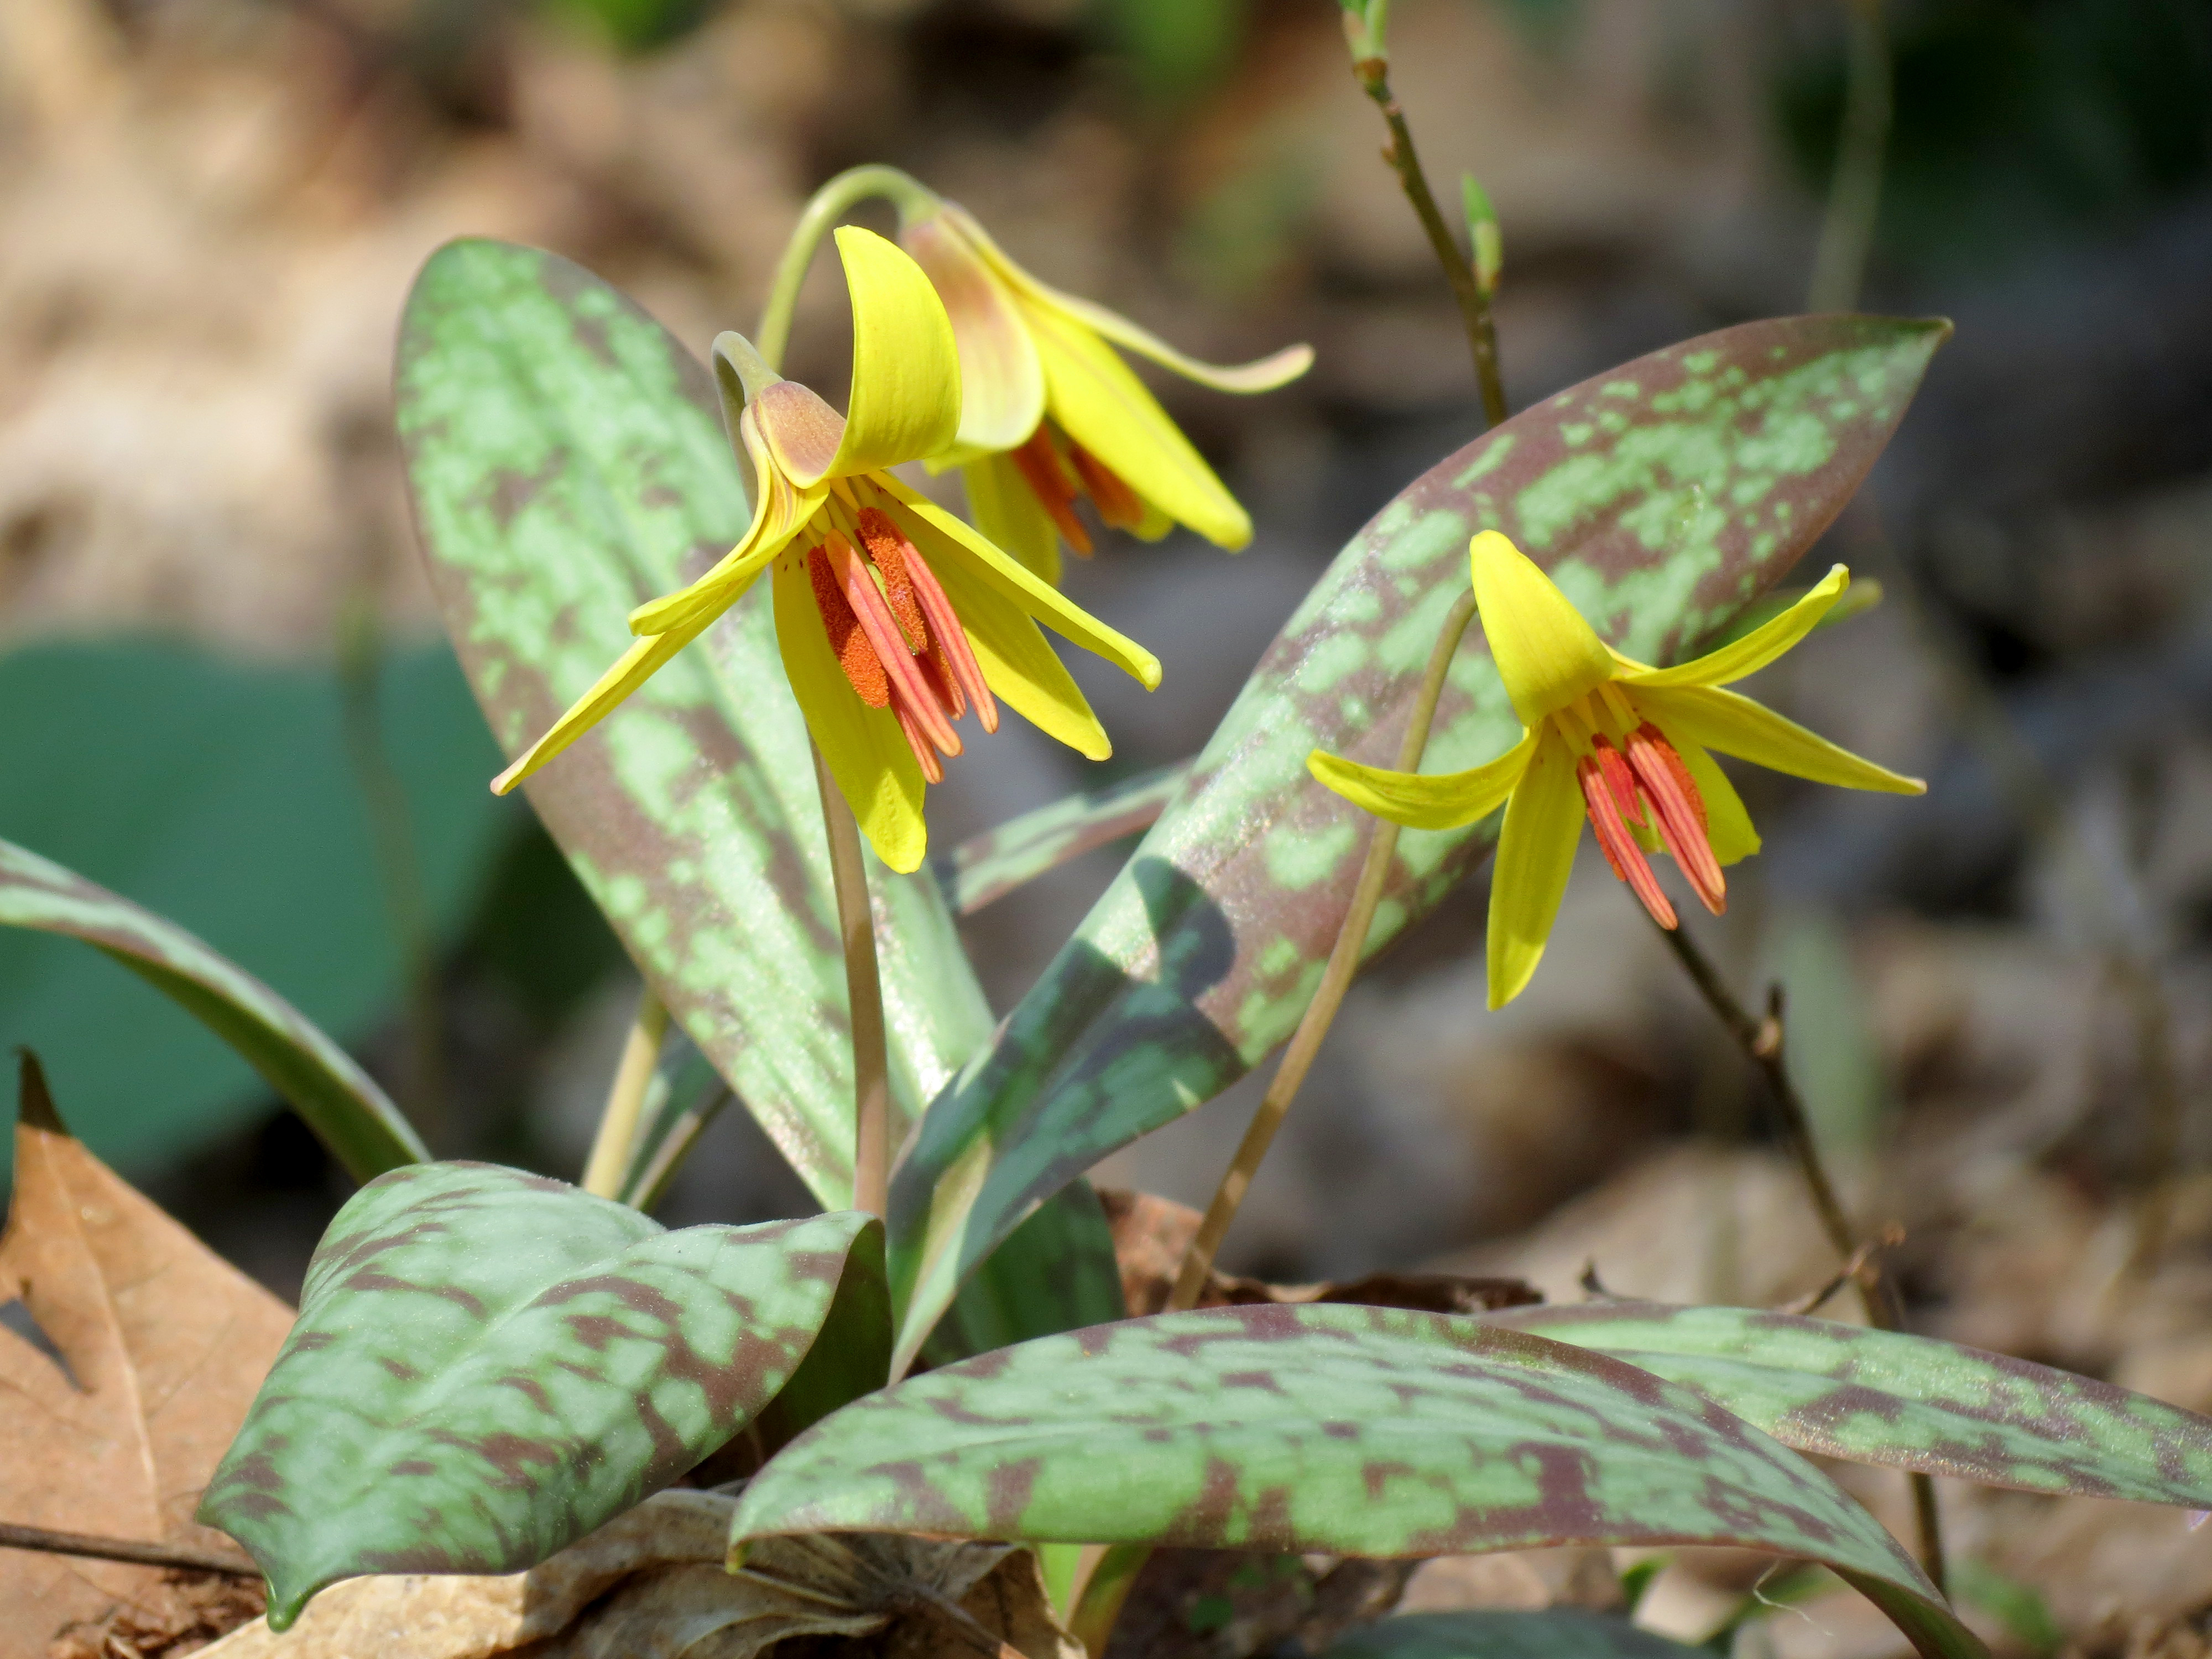 A close up of a trout lily with yellow flowers